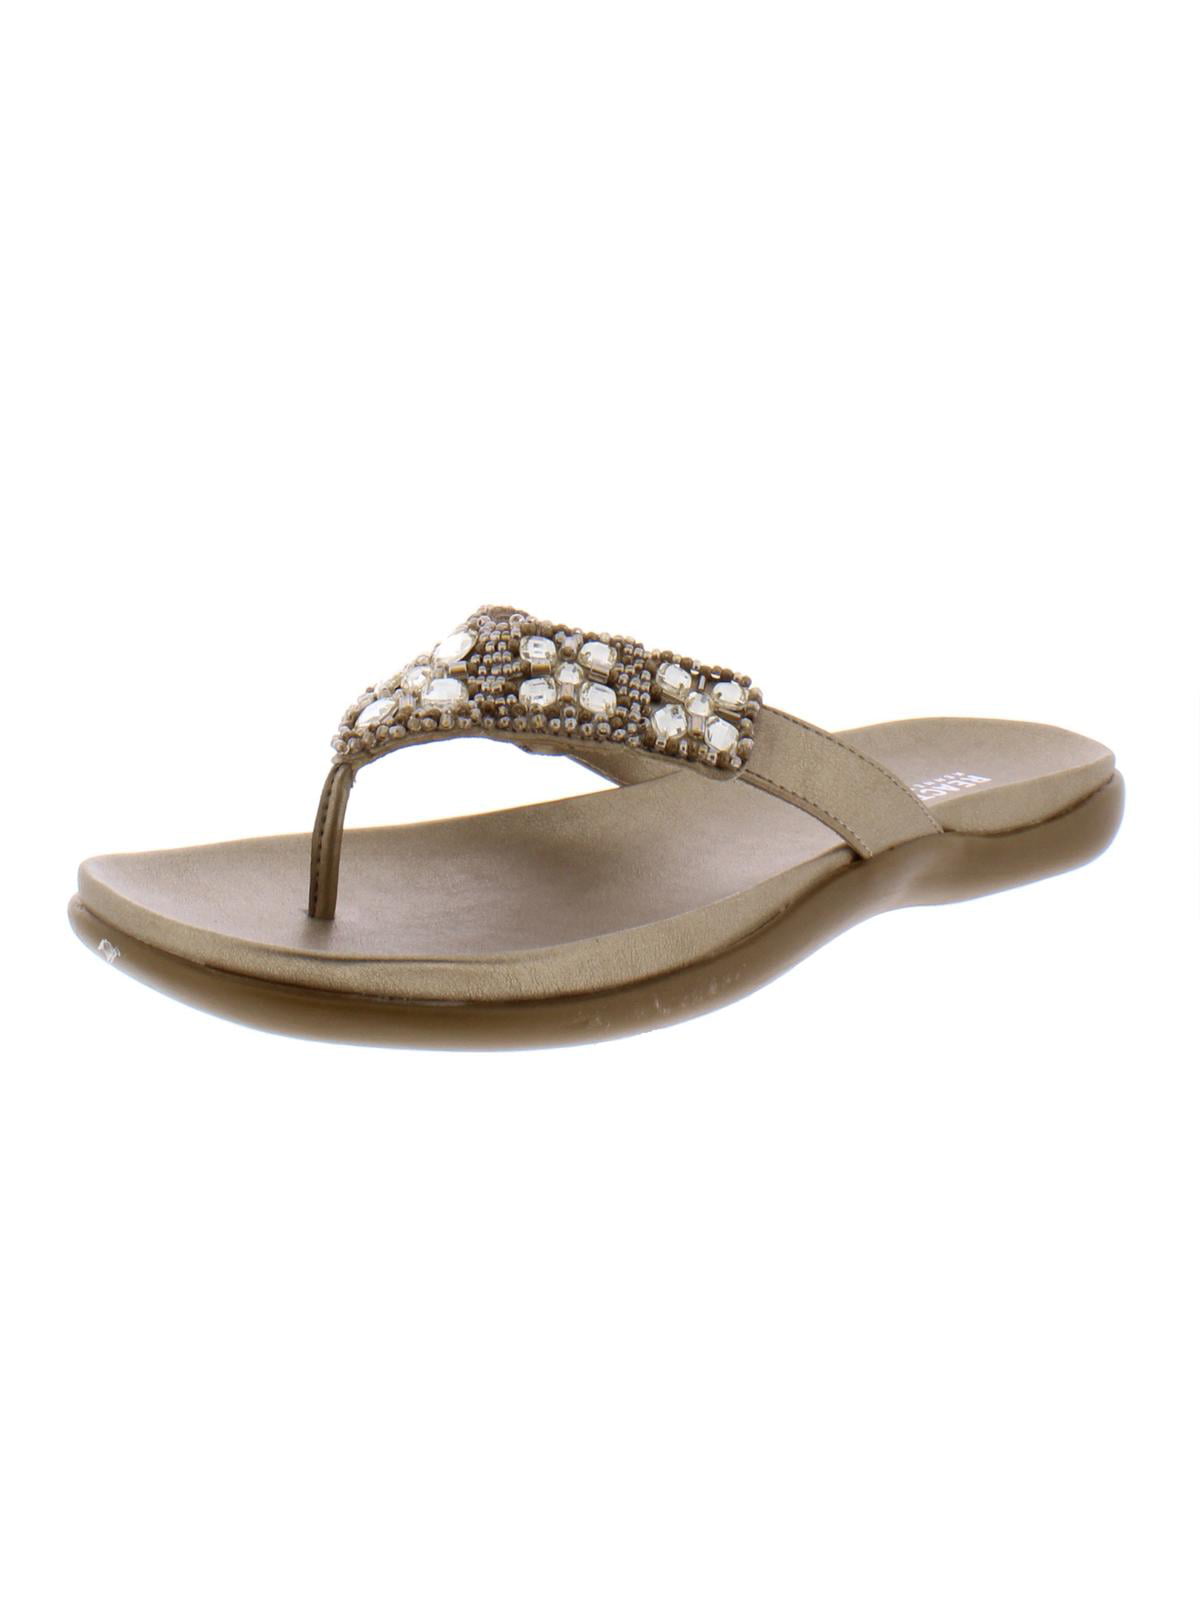 Kenneth Cole Reaction Womens Glam-Athon Faux Leather Thong Flip-Flops ...